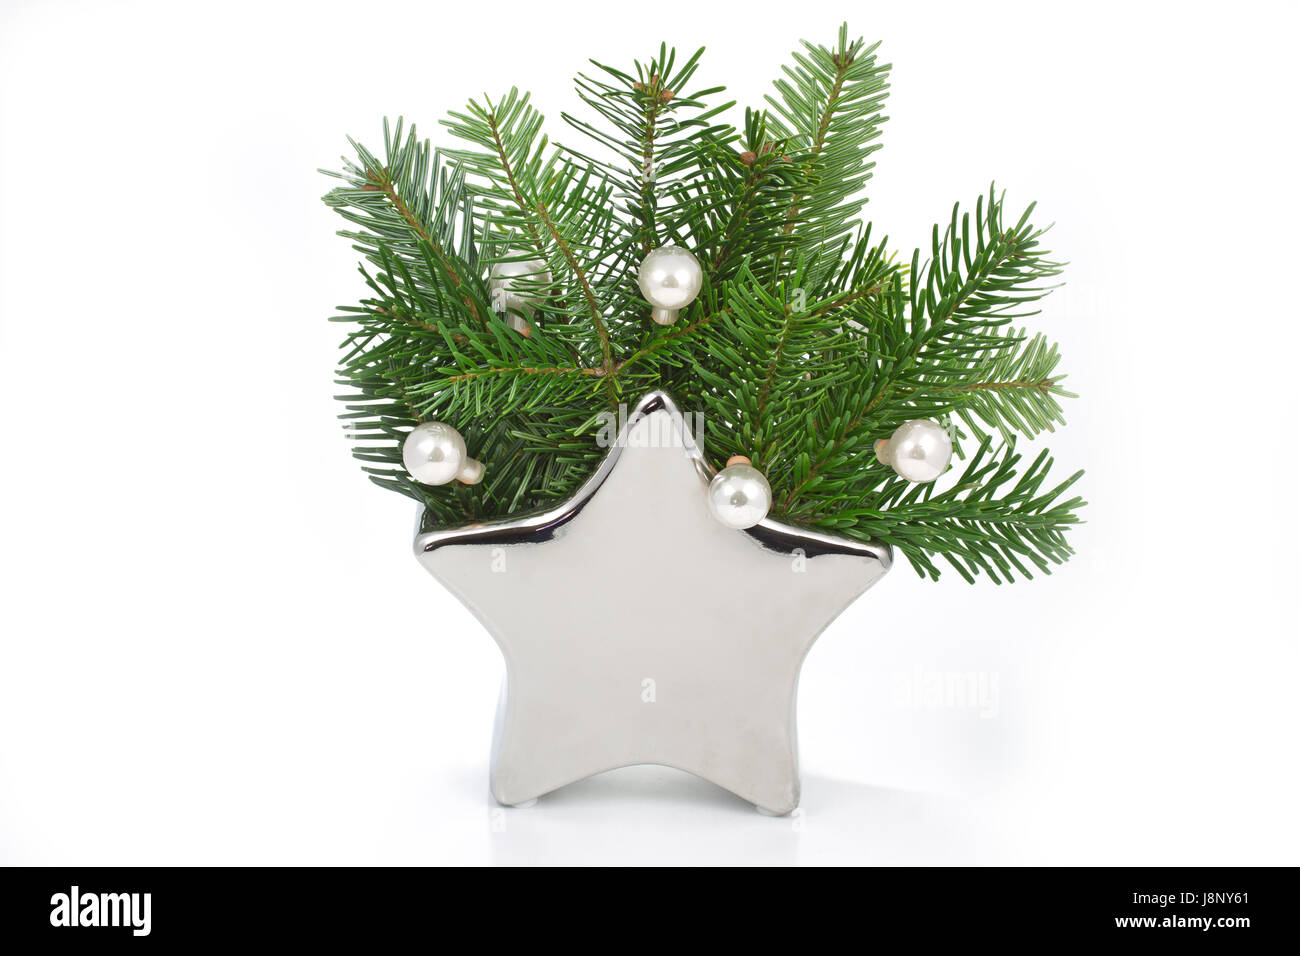 of fir in a star-shaped vase Stock Photo